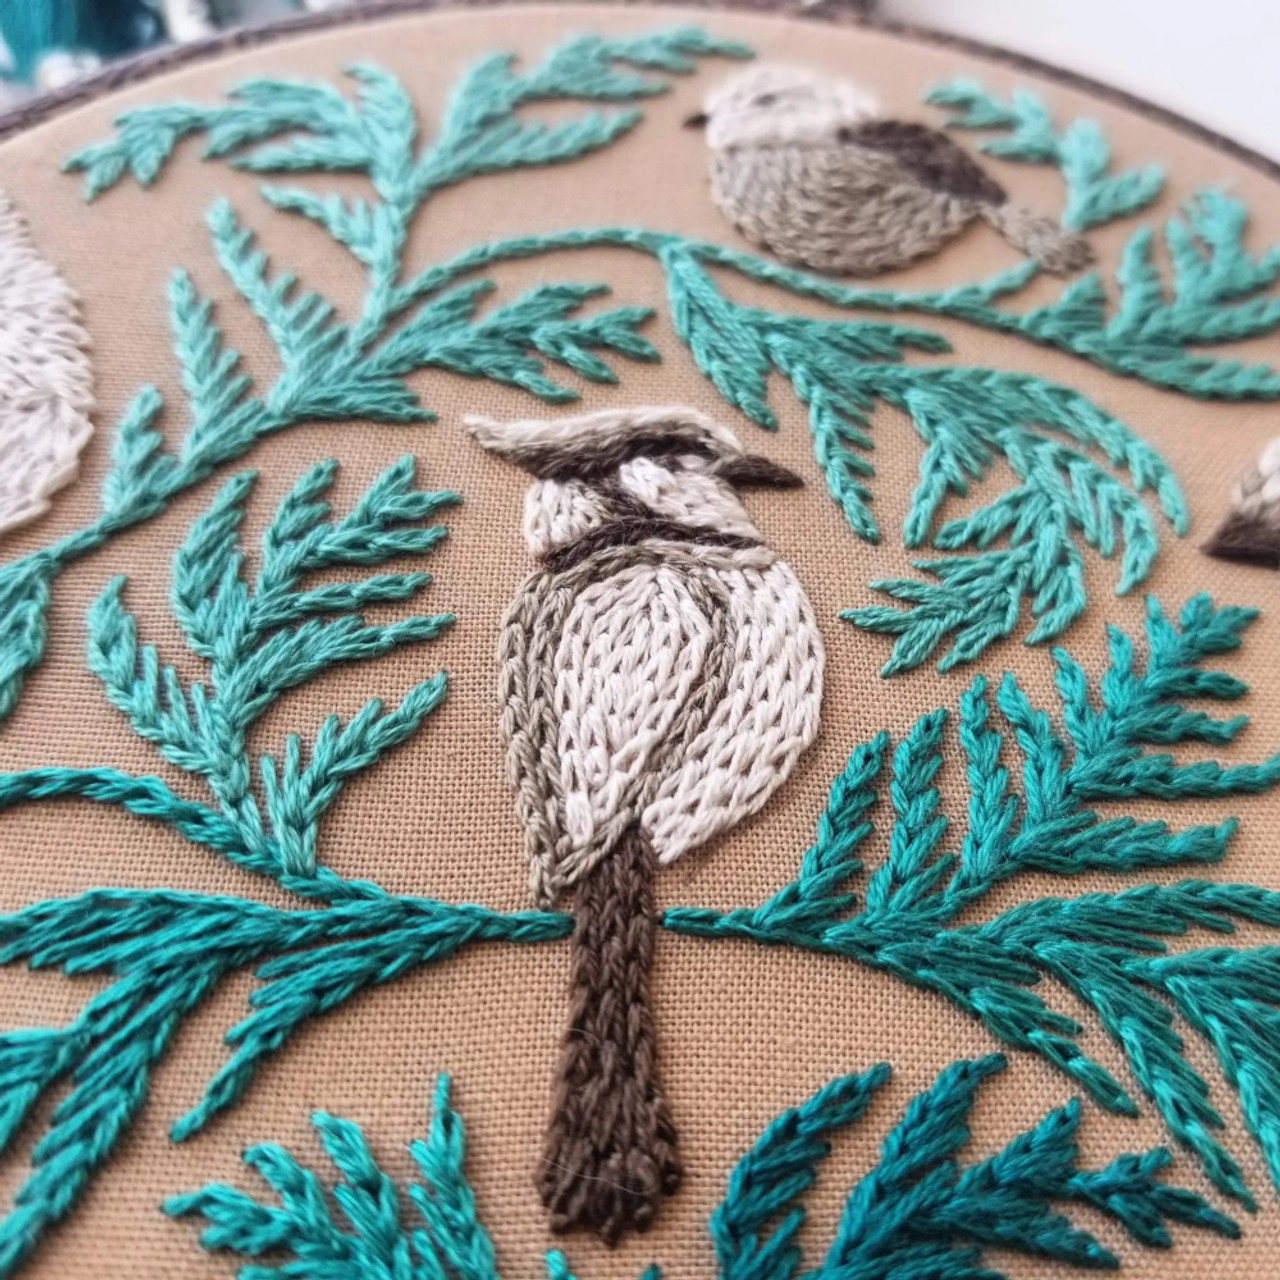 Jessica Long Embroidery Kit Autumn Birds (Grey Blue Fabric) - The Websters